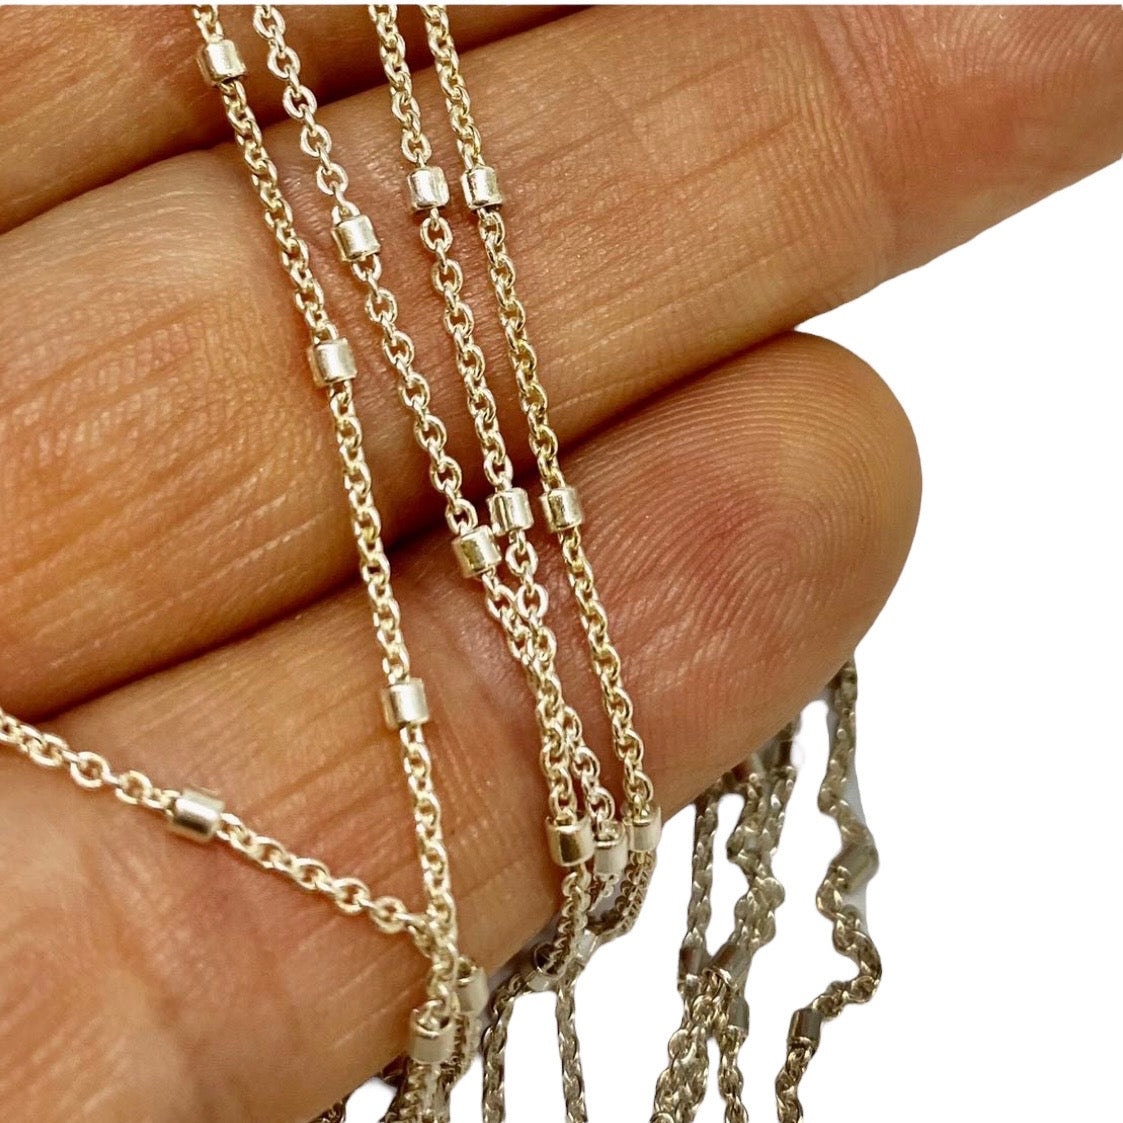 Thin stylish chain with silver studs